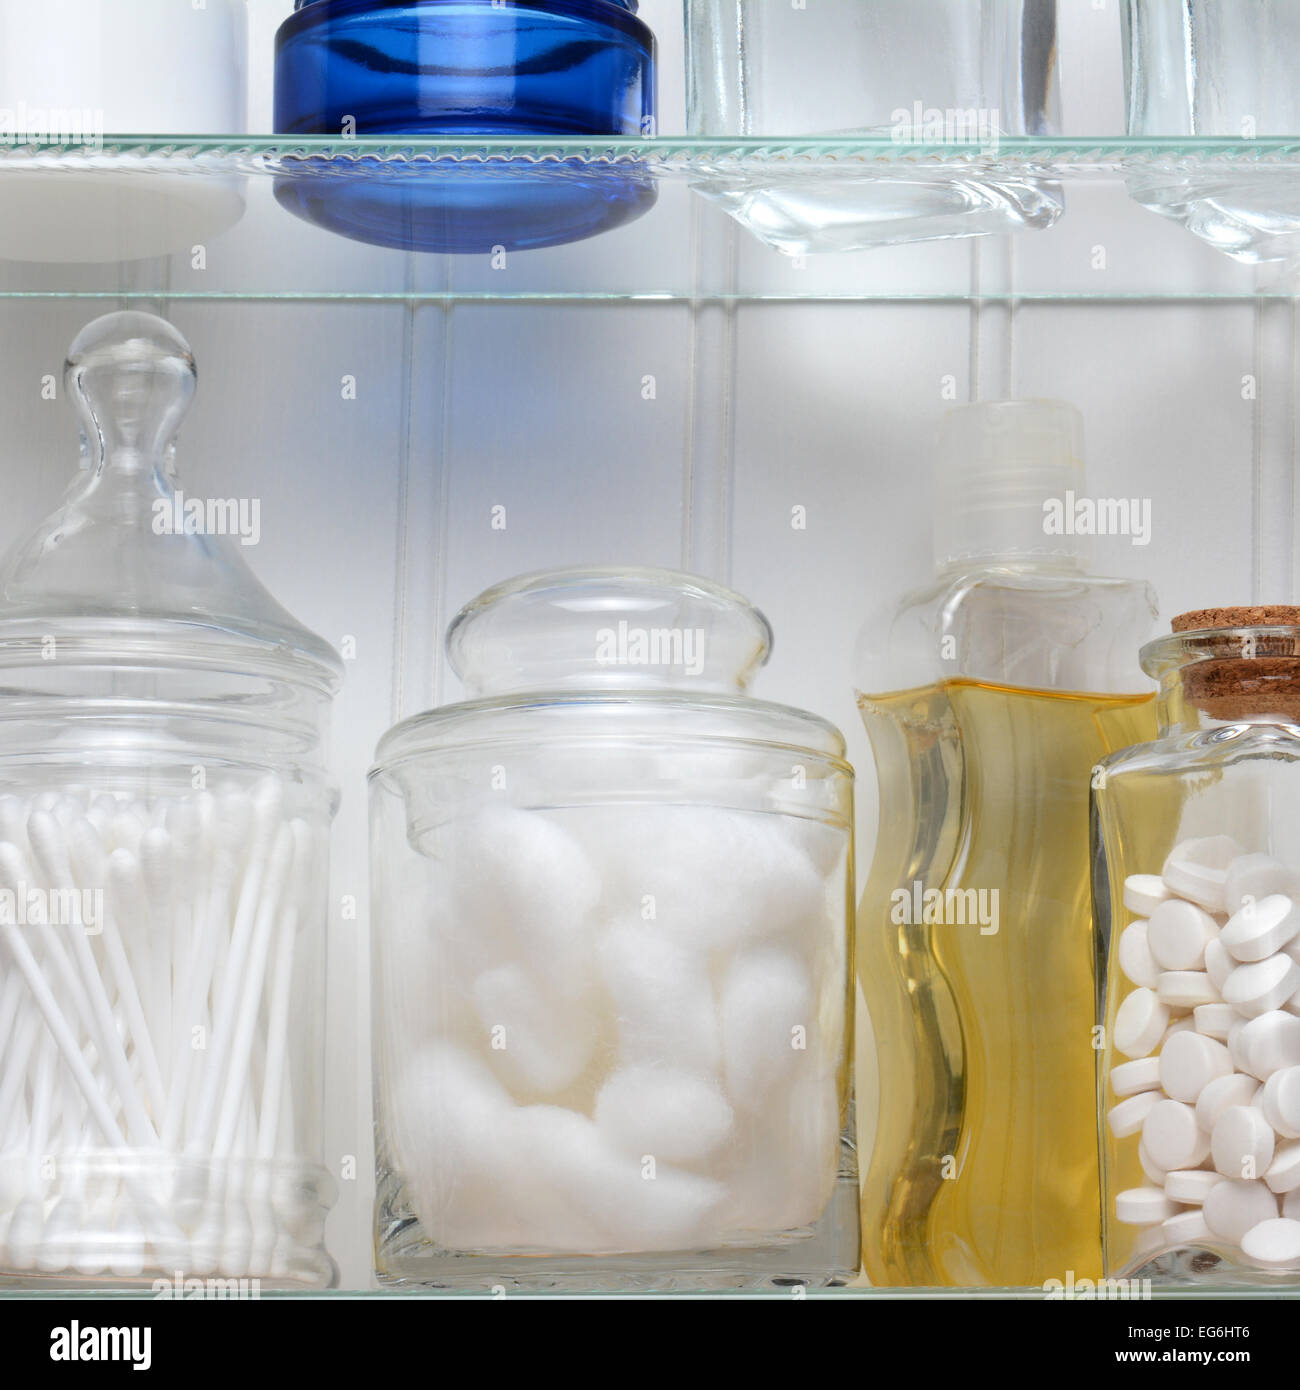 Closeup of two shelves of a medicine cabinet. A bottle of tablets, cotton balls and cotton swabs and assorted jars and bottles o Stock Photo